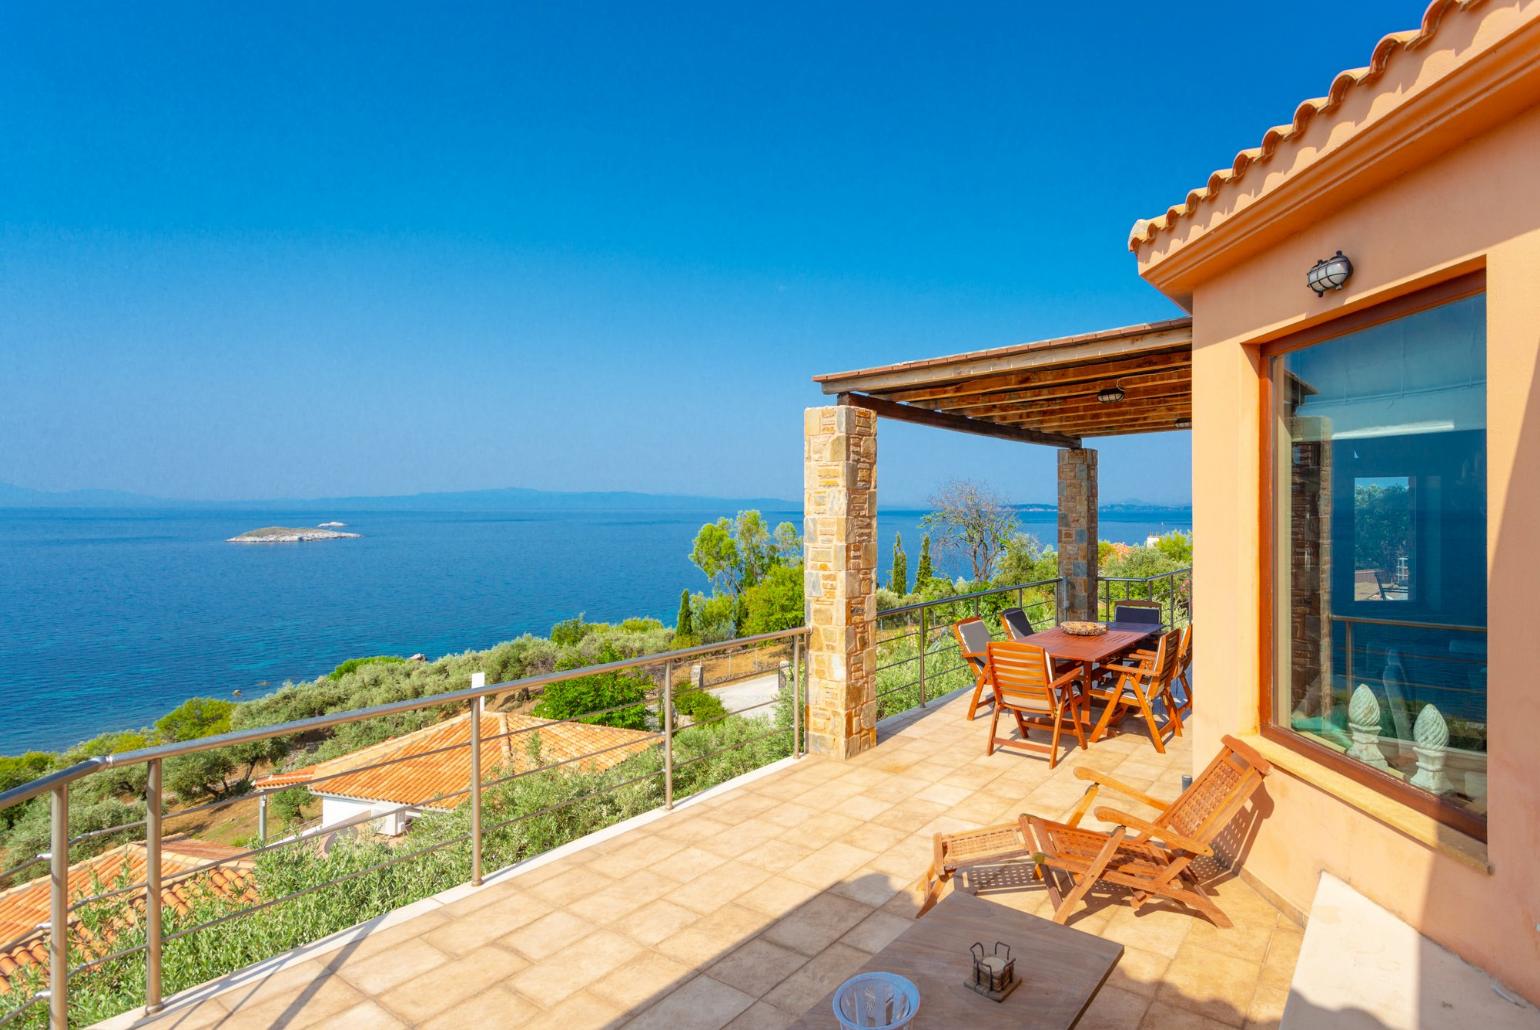 Private terrace area with panoramic sea views